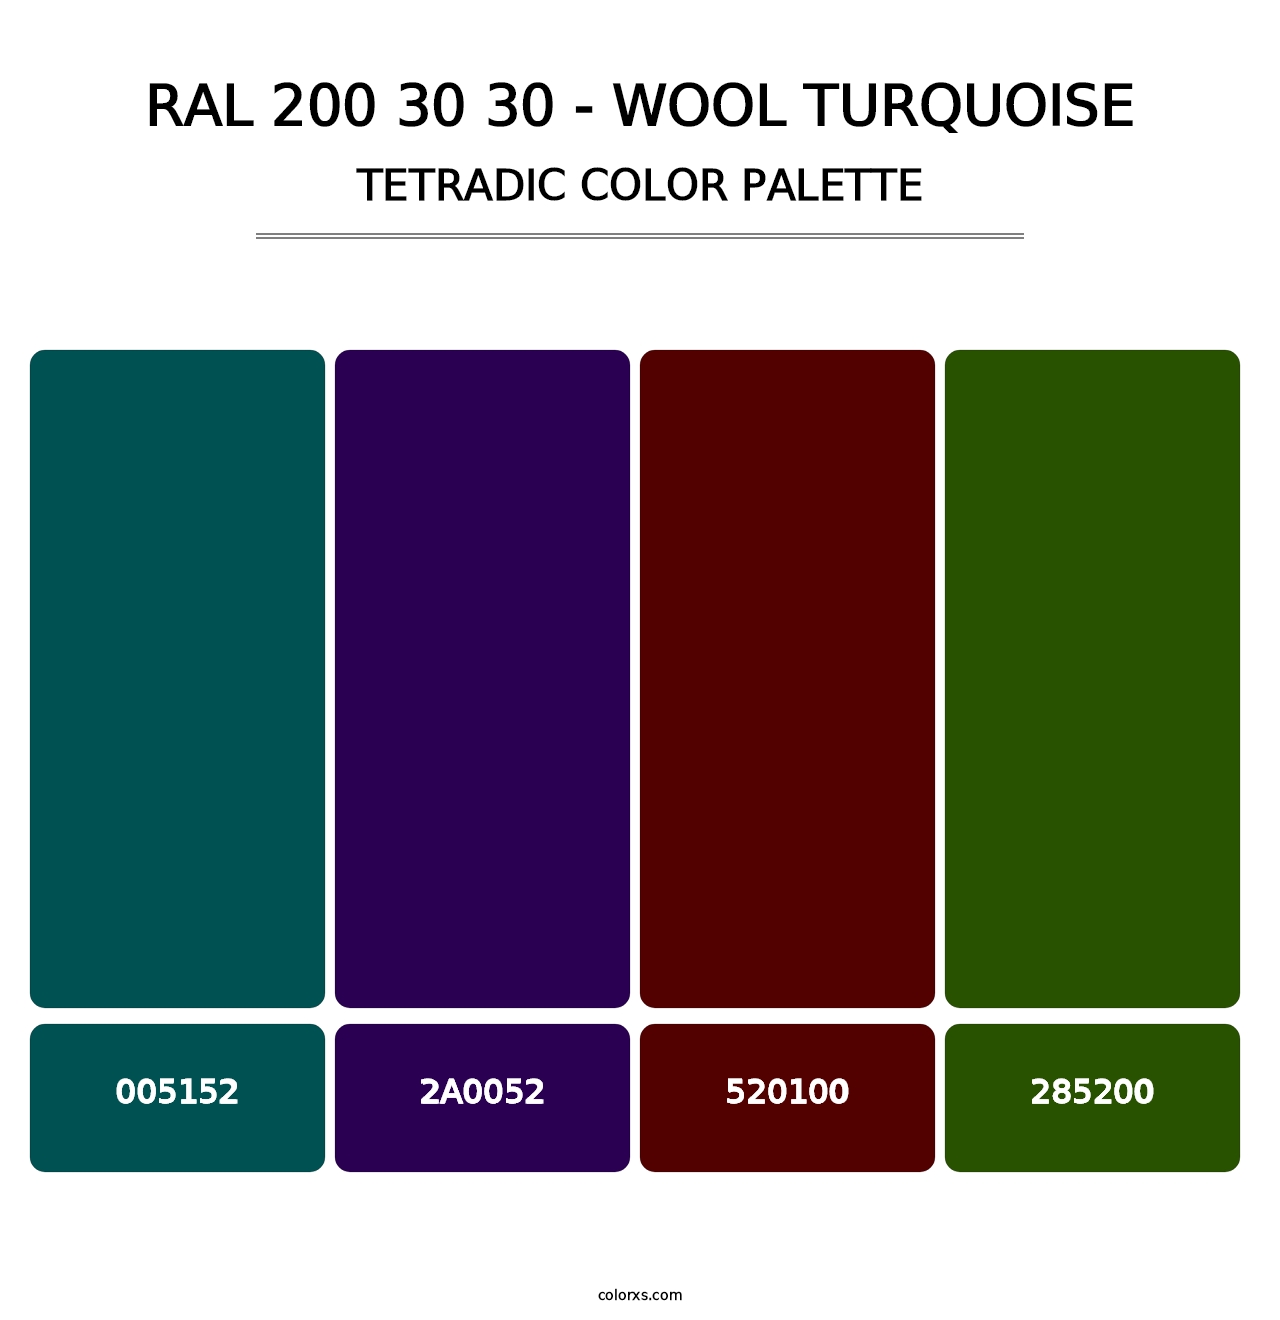 RAL 200 30 30 - Wool Turquoise - Tetradic Color Palette